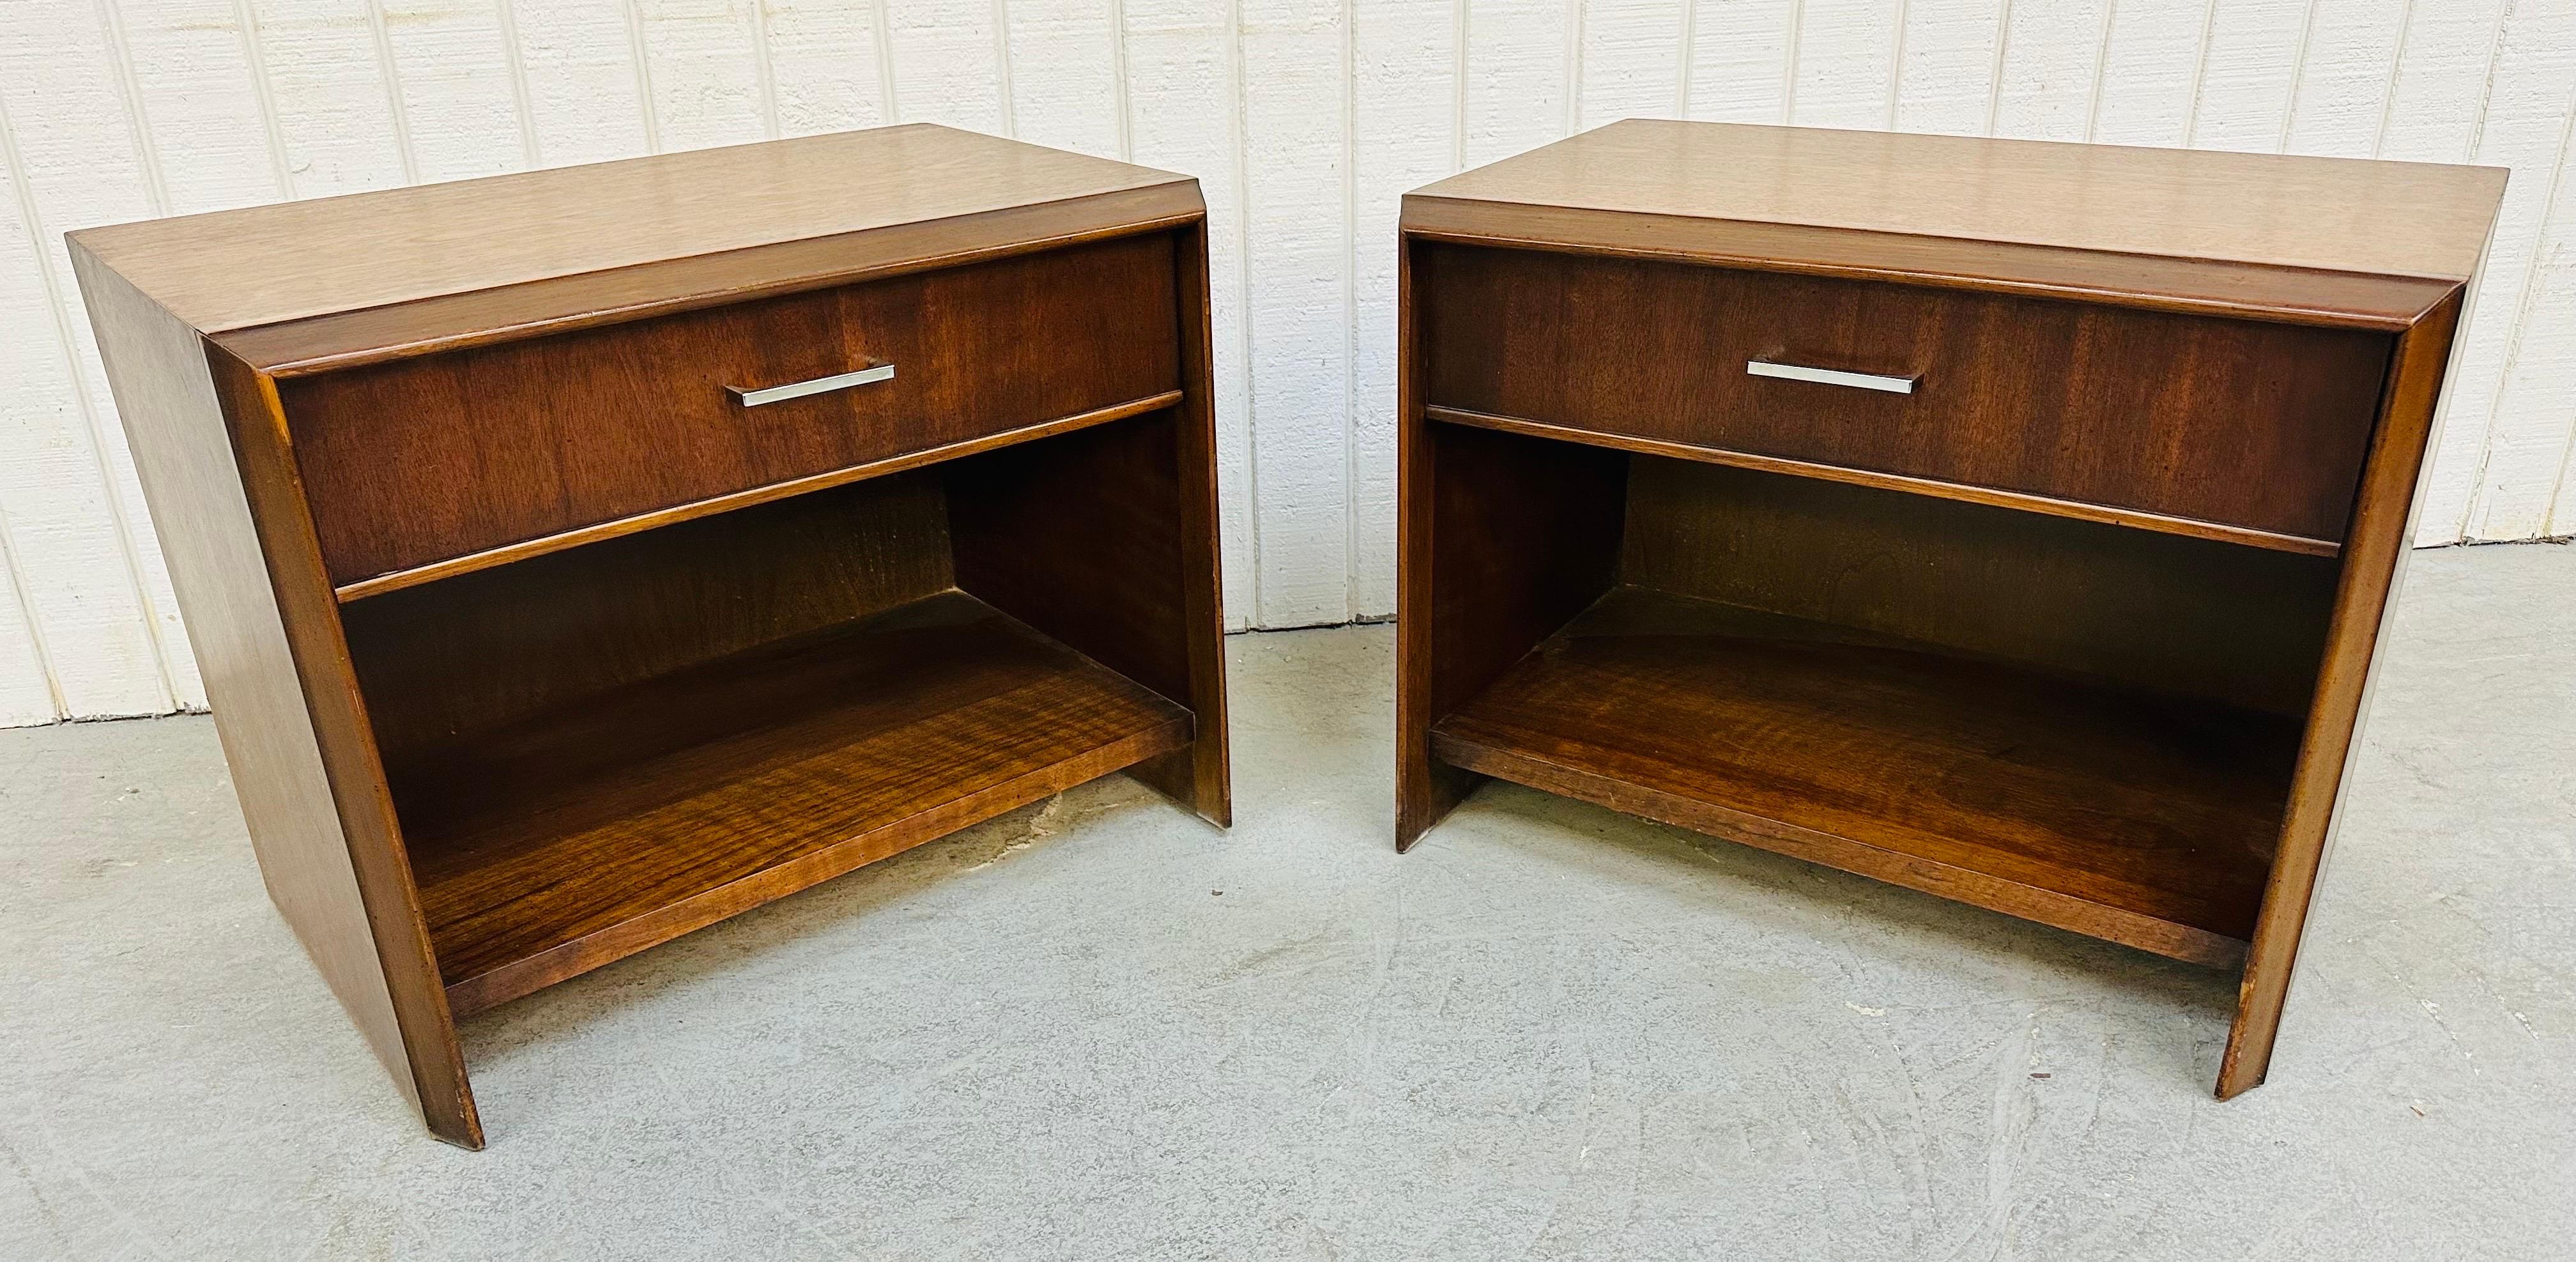 This listing is for a pair of Mid-Century Modern Lane Walnut Nightstands. Featuring a straight line design, single drawer for storage, opened bottom for more storage space, and original chrome pulls. This is an exceptional combination of quality and